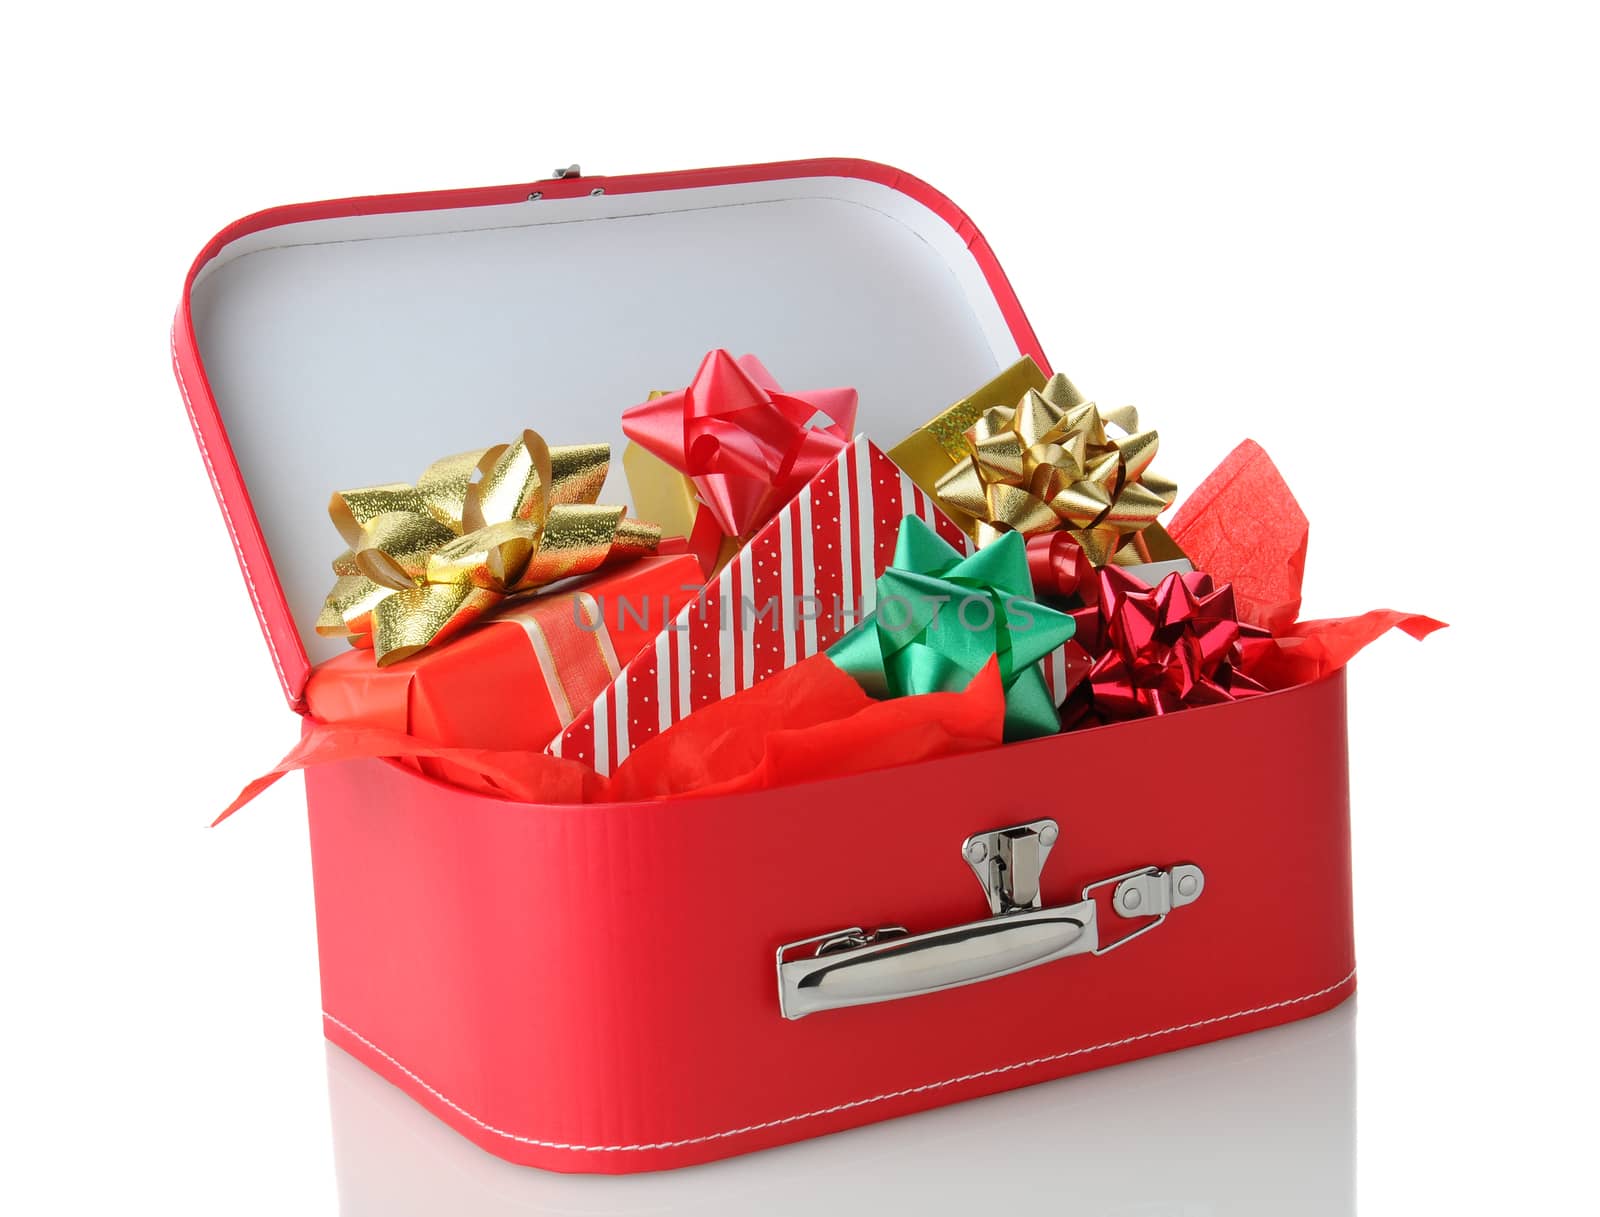 Closeup of a red suitcase full of wrapped presents. Horizontal format over a white background with reflection.